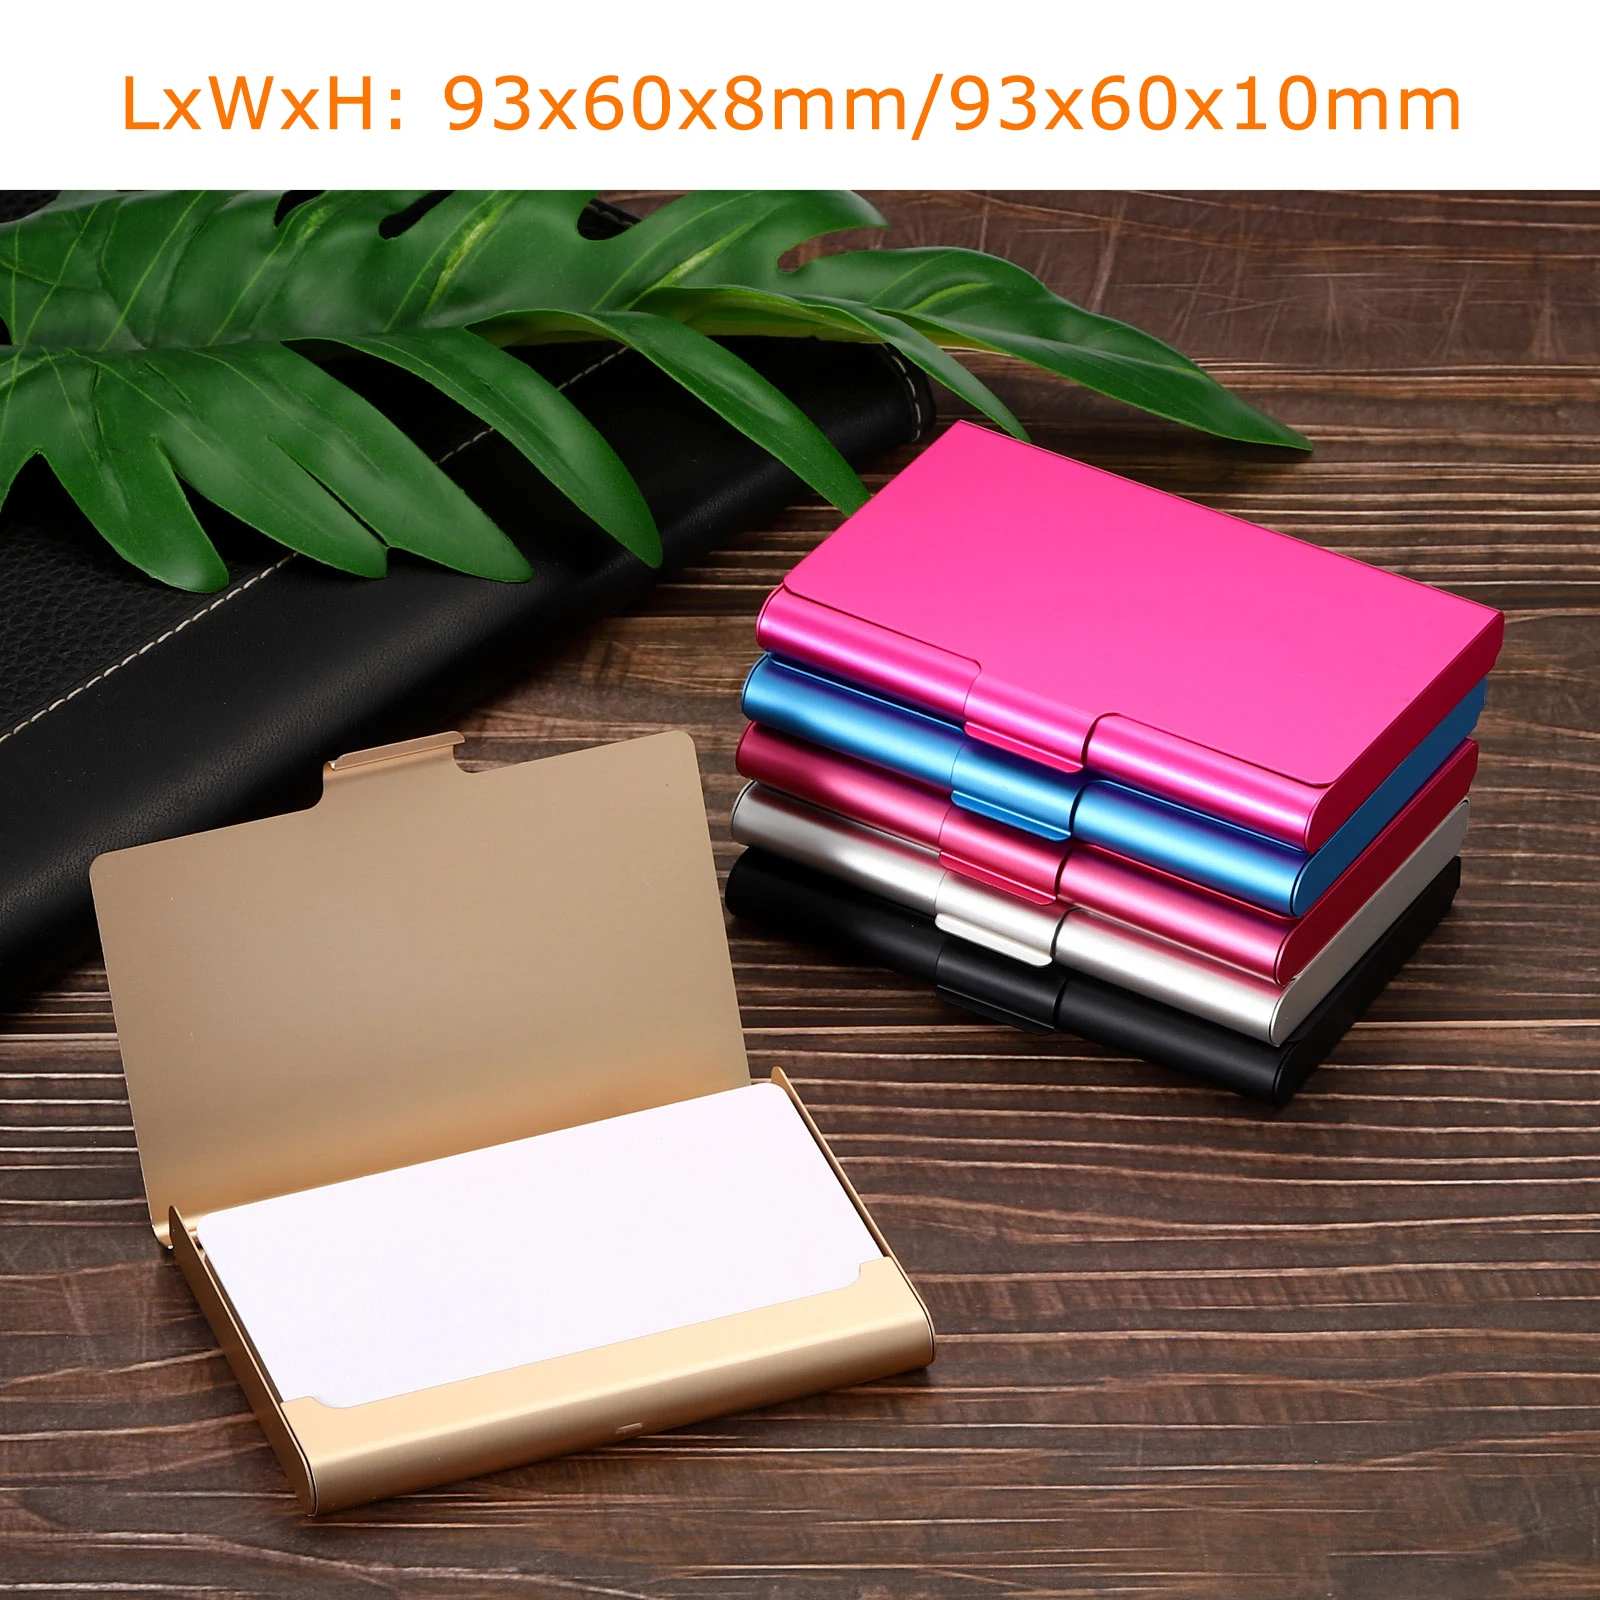 1/2Pc Creative Business Card Case Aluminum Alloy Card Holder Metal Box Cover Professional Business Card Holder Card Metal Wallet